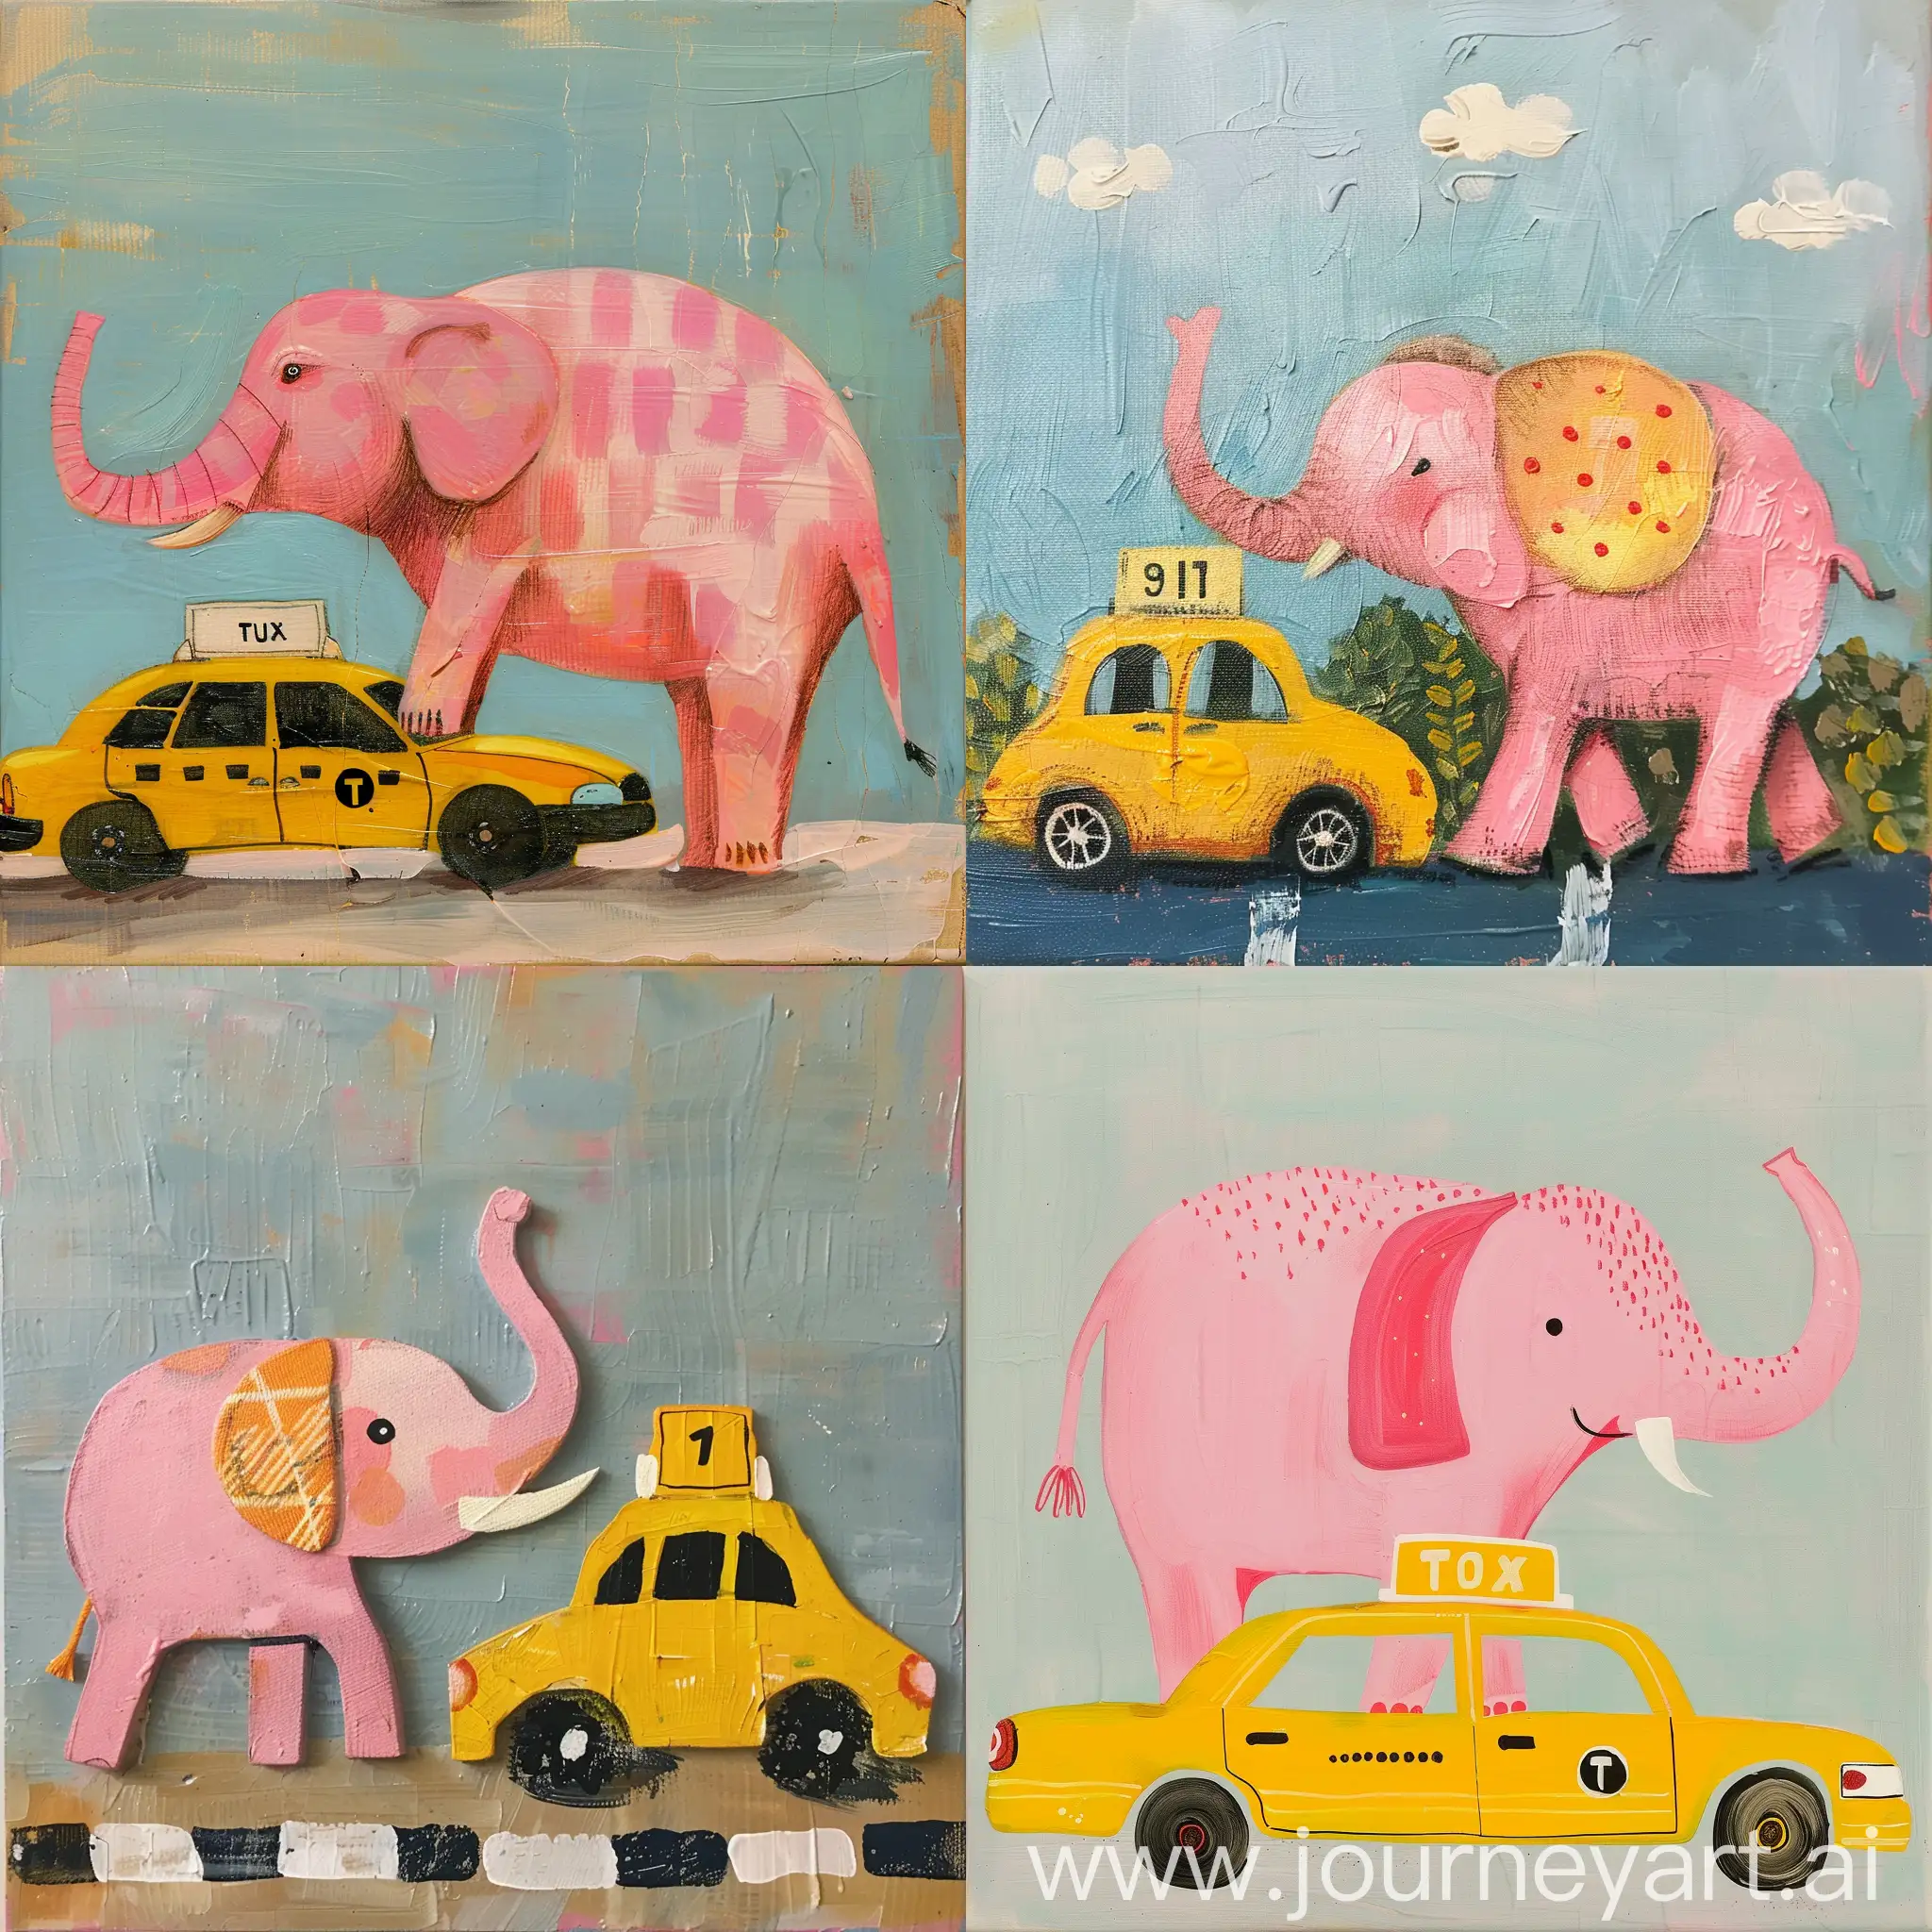 Whimsical-Pink-Elephant-and-Yellow-Taxi-in-Playful-Encounter